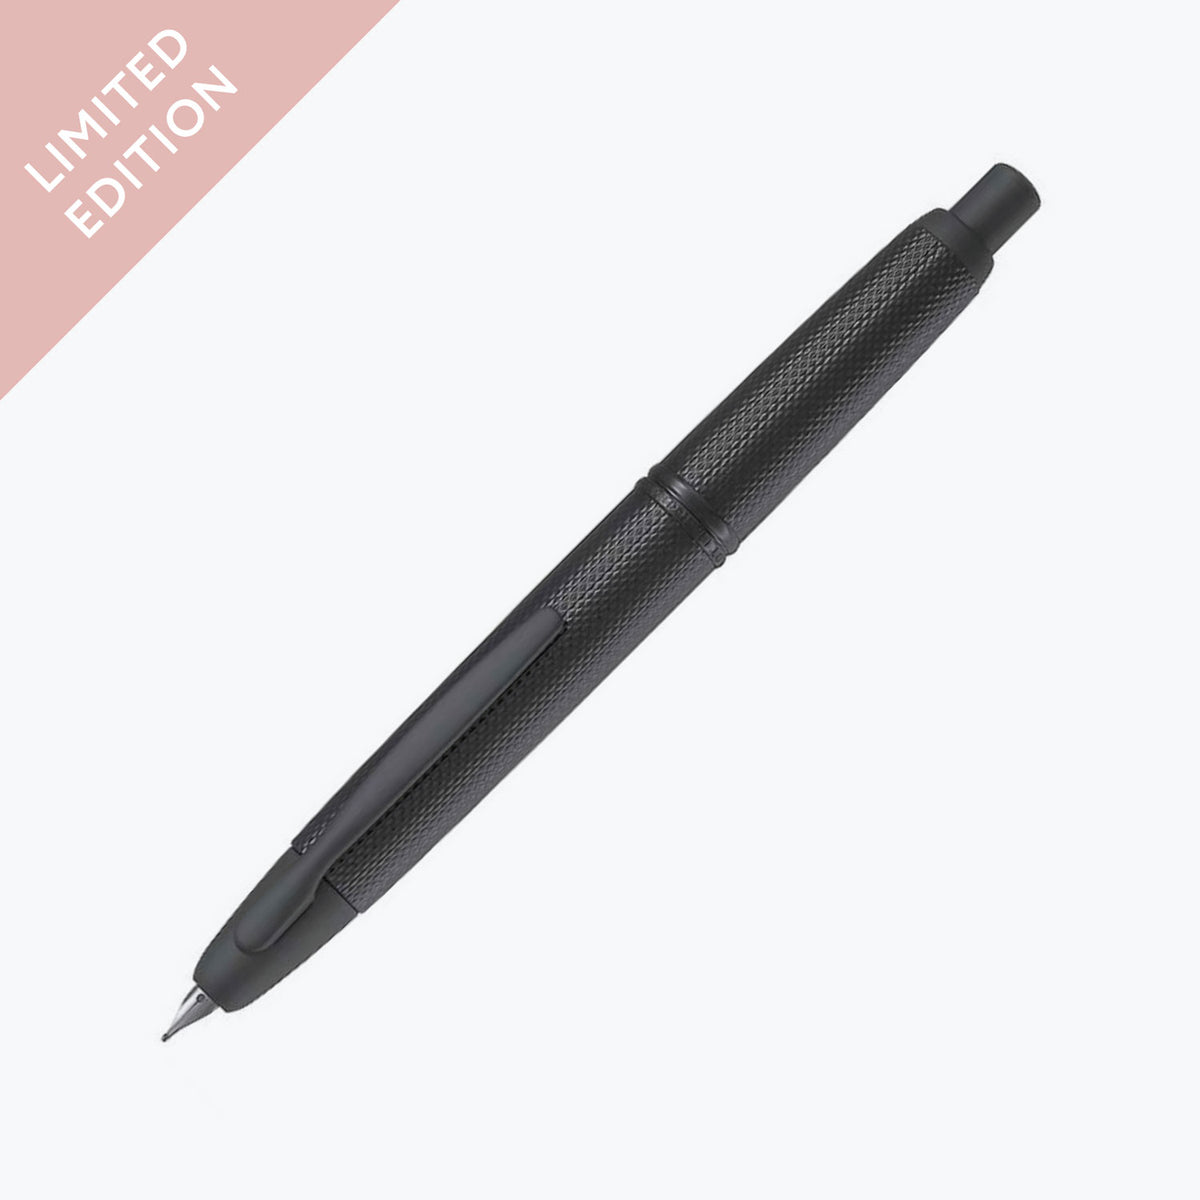 Pilot - Fountain Pen - Capless - Black Link (2020 Limited Edition) [SOLD OUT]